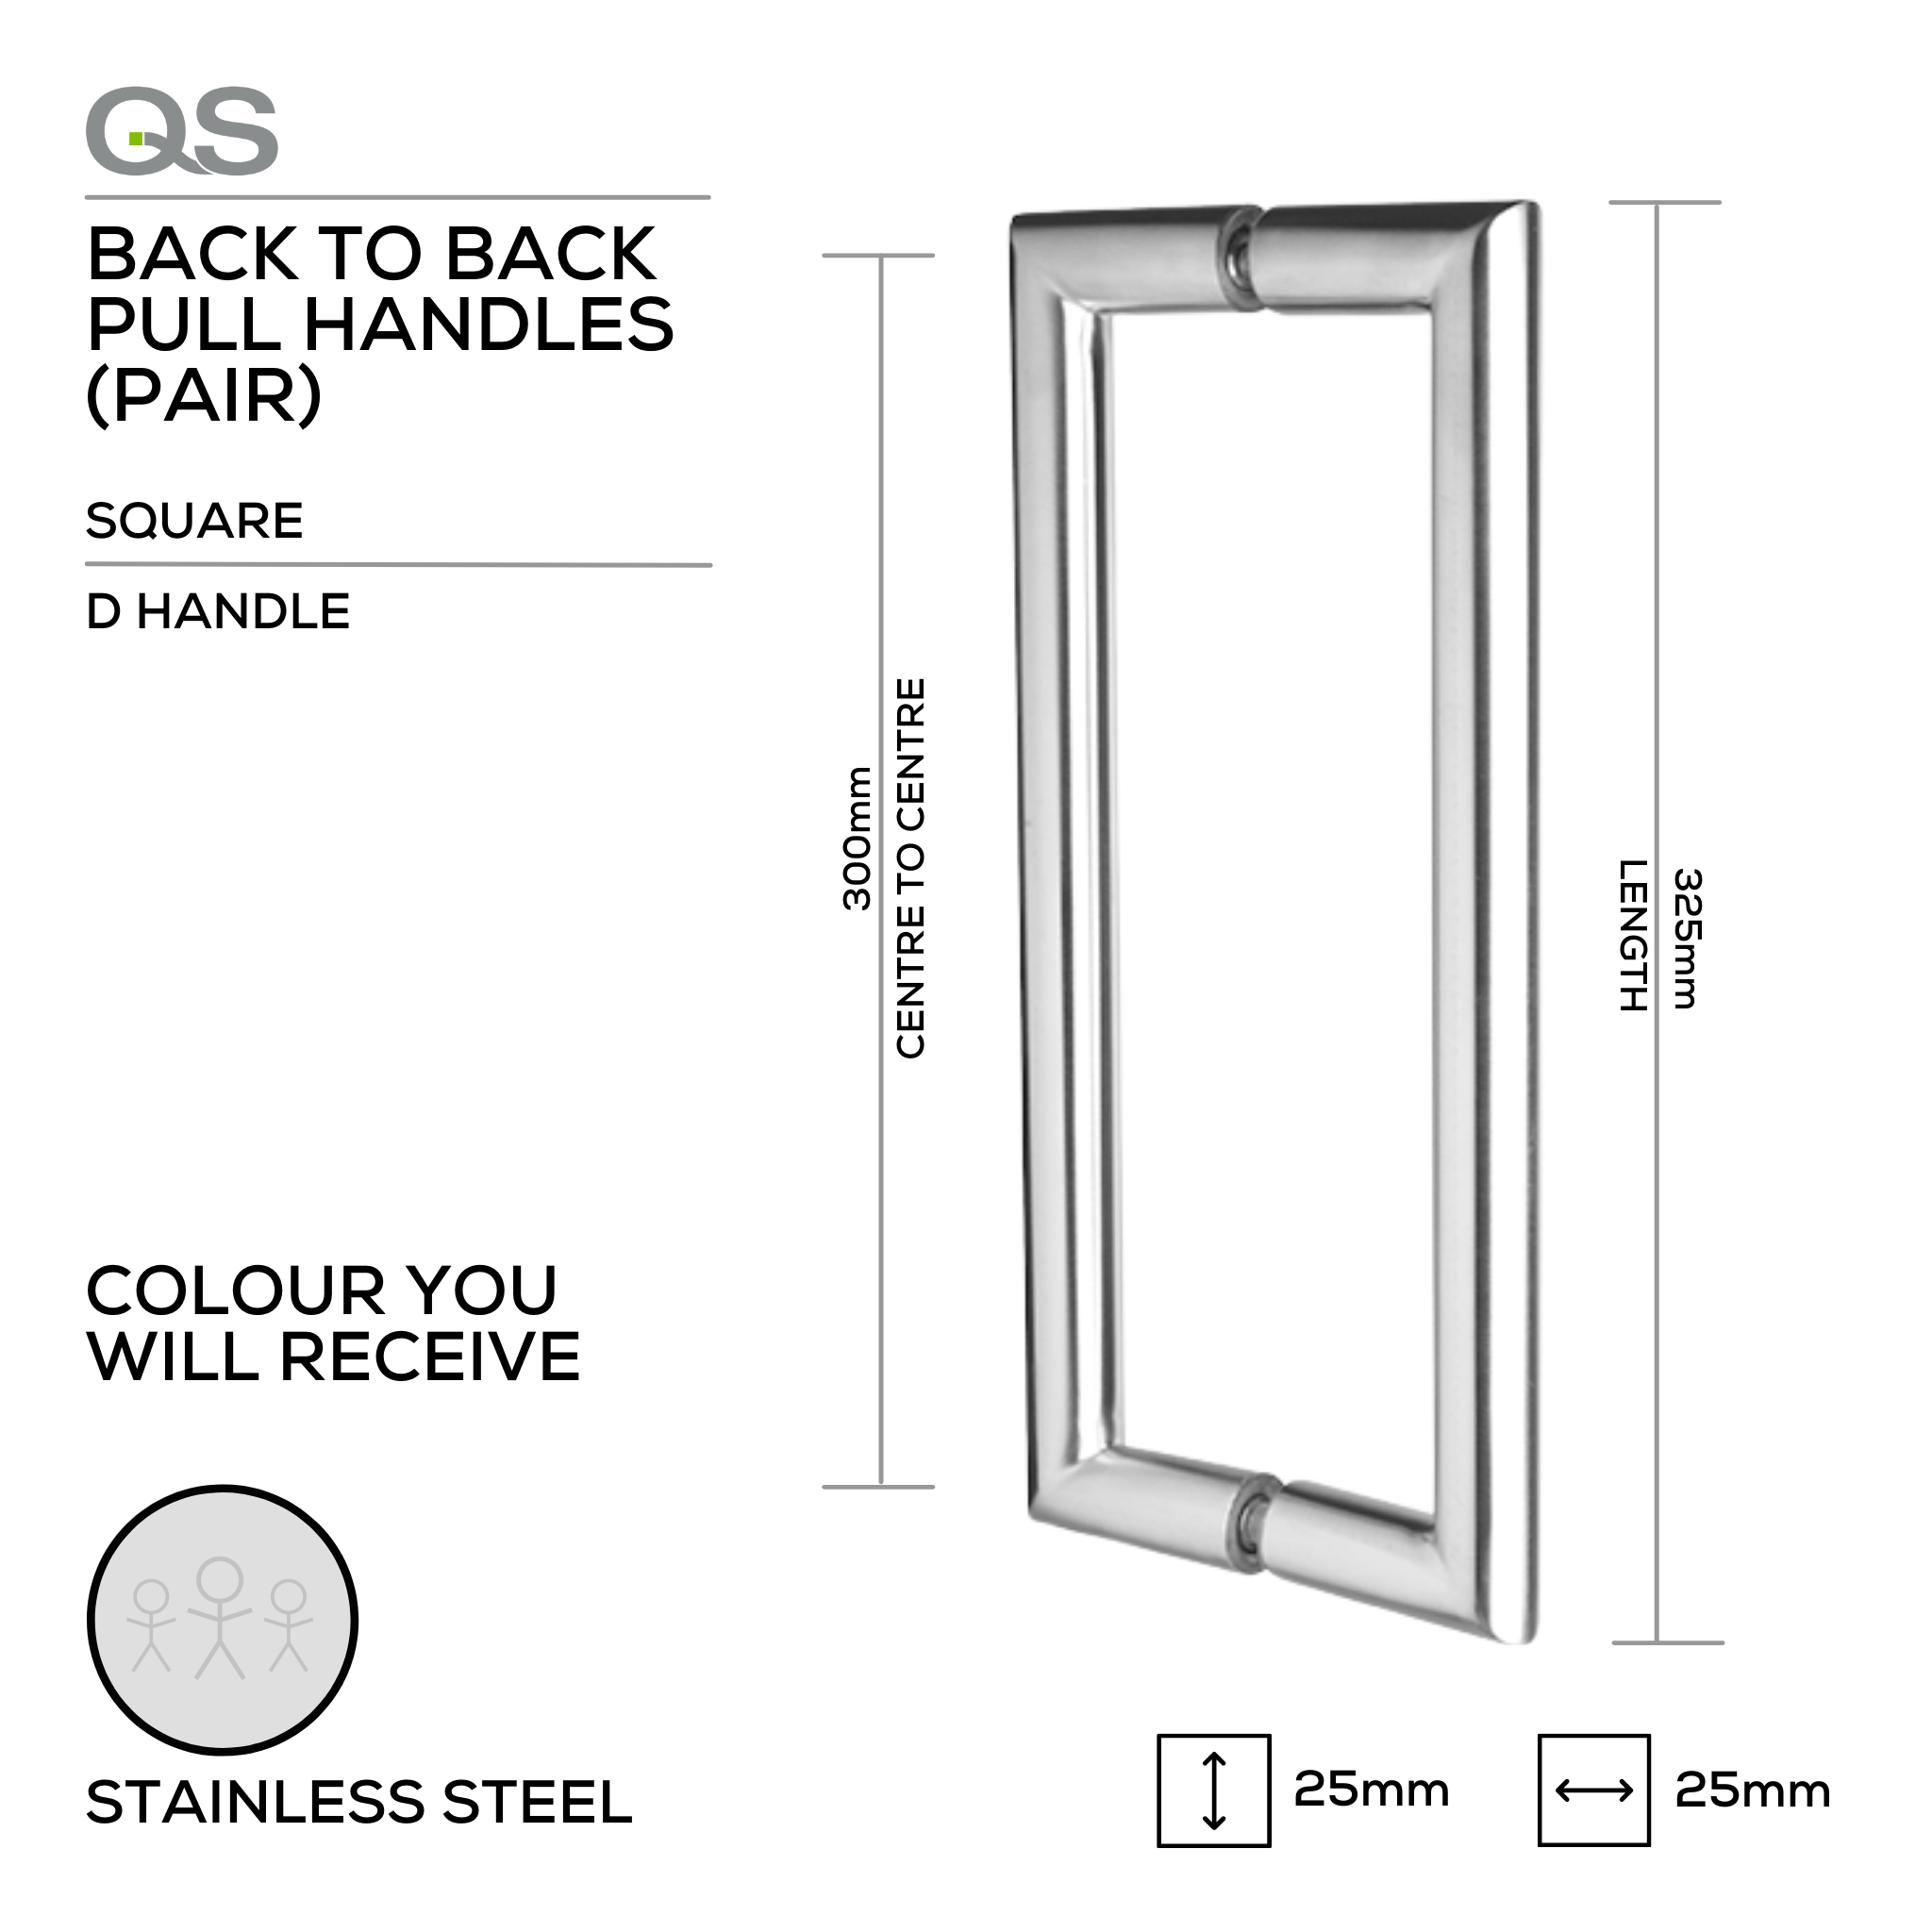 QS2602 Square D, Pull Handle, Square, D Handle, BTB, 25mm (d) x 325mm (l) x 300mm (ctc), Stainless Steel, QS